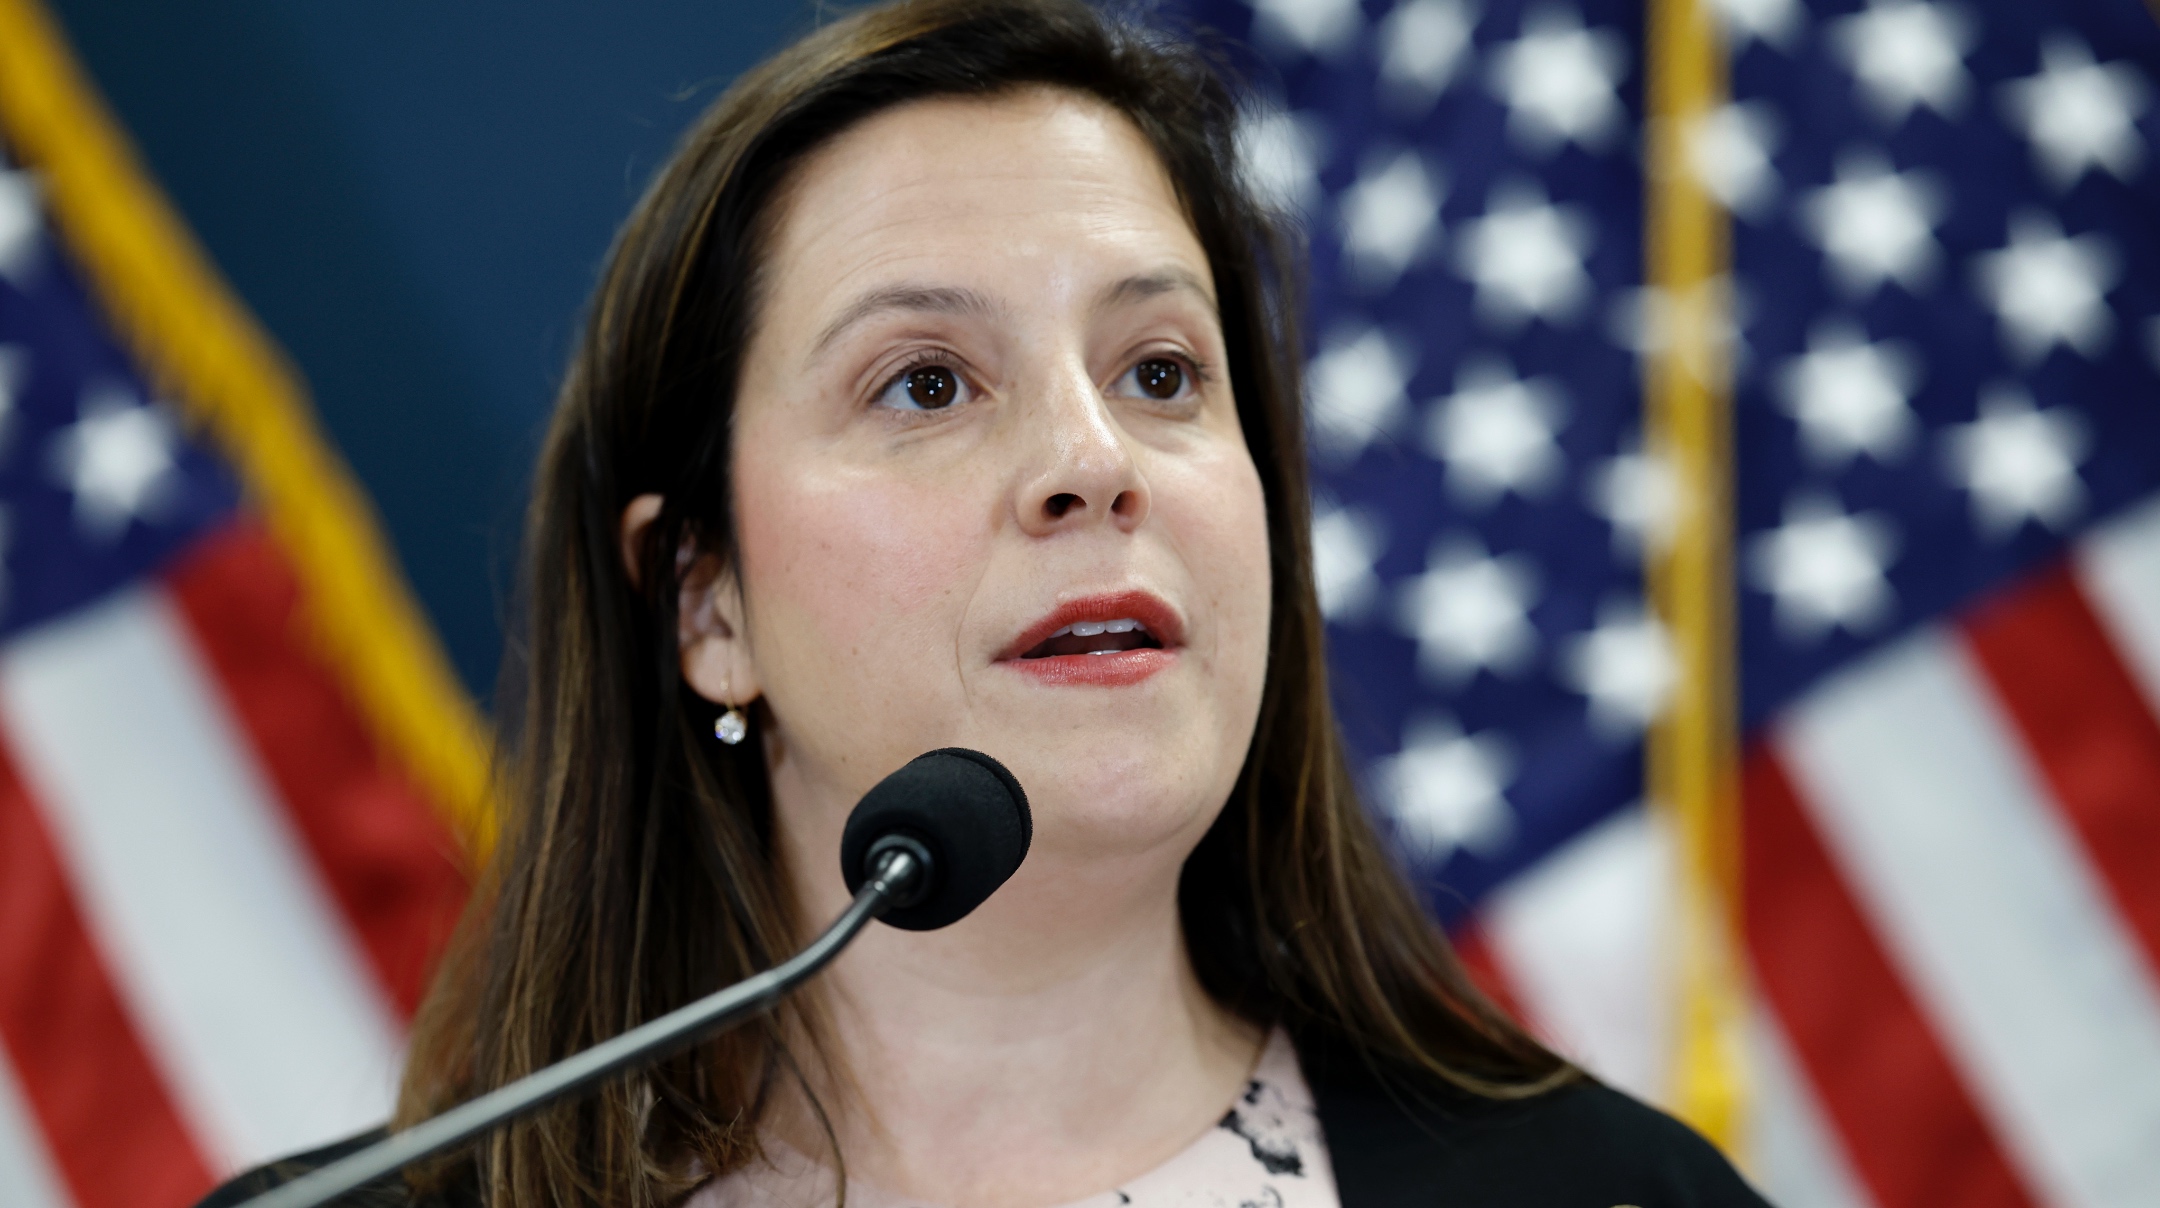 House Republican Conference Chair Rep. Elise Stefanik (R-NY) speaks to reporters at a press conference following a House Republican Conference meeting at the U.S. Capitol Building, July 18, 2023. (Anna Moneymaker/Getty Images)